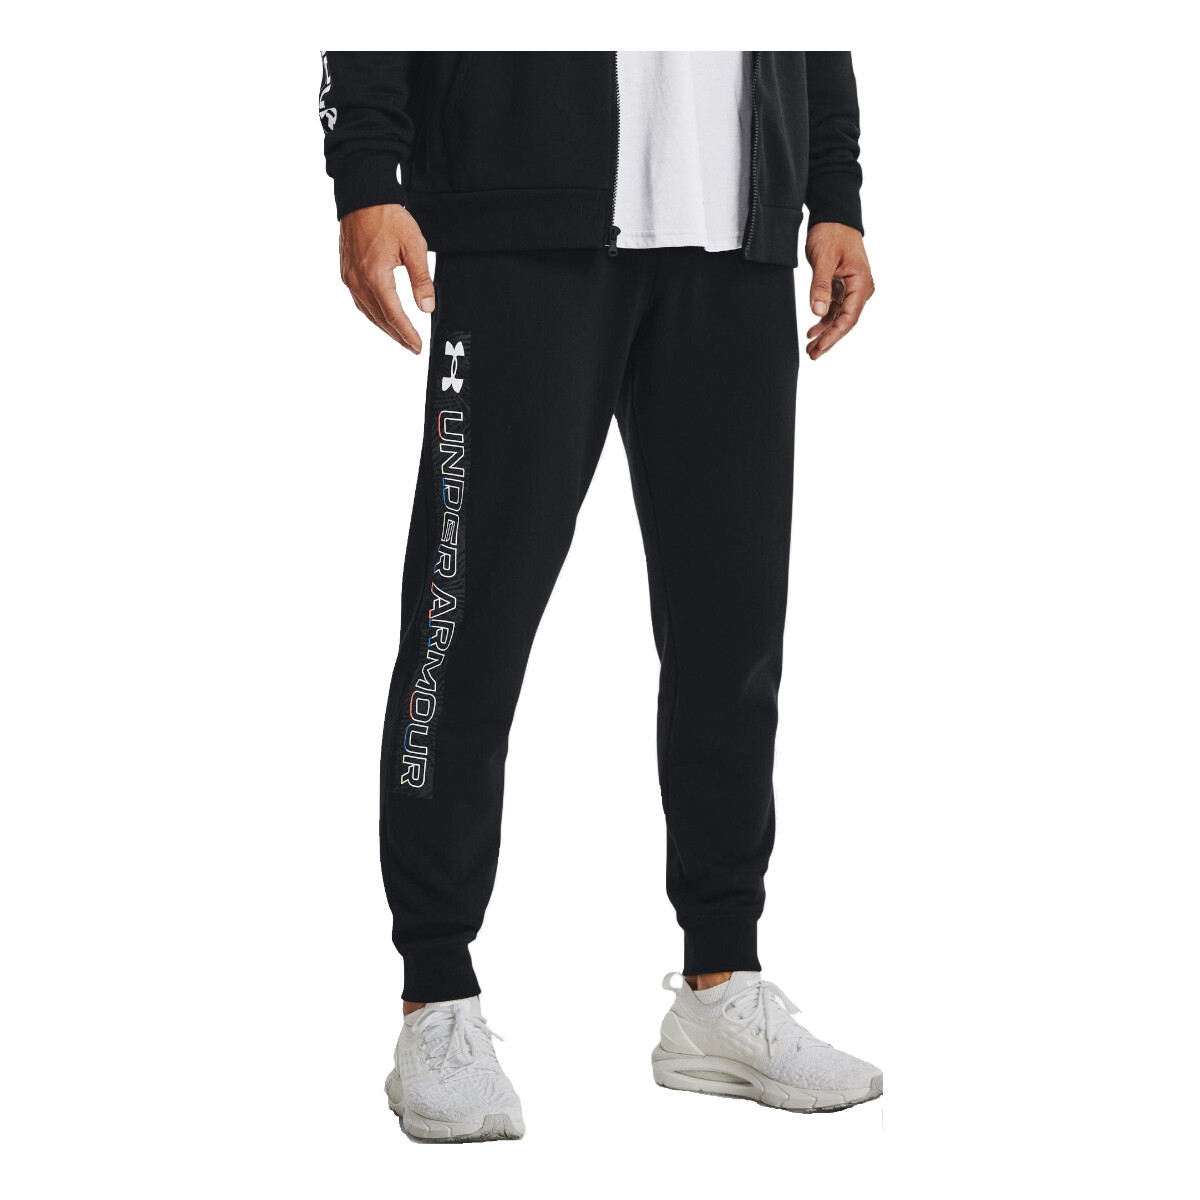 Textil Homem The Under blk Armour Curry 7 Bamazing is releasing tomorrow on Rival Fleece Graphic Joggers Preto